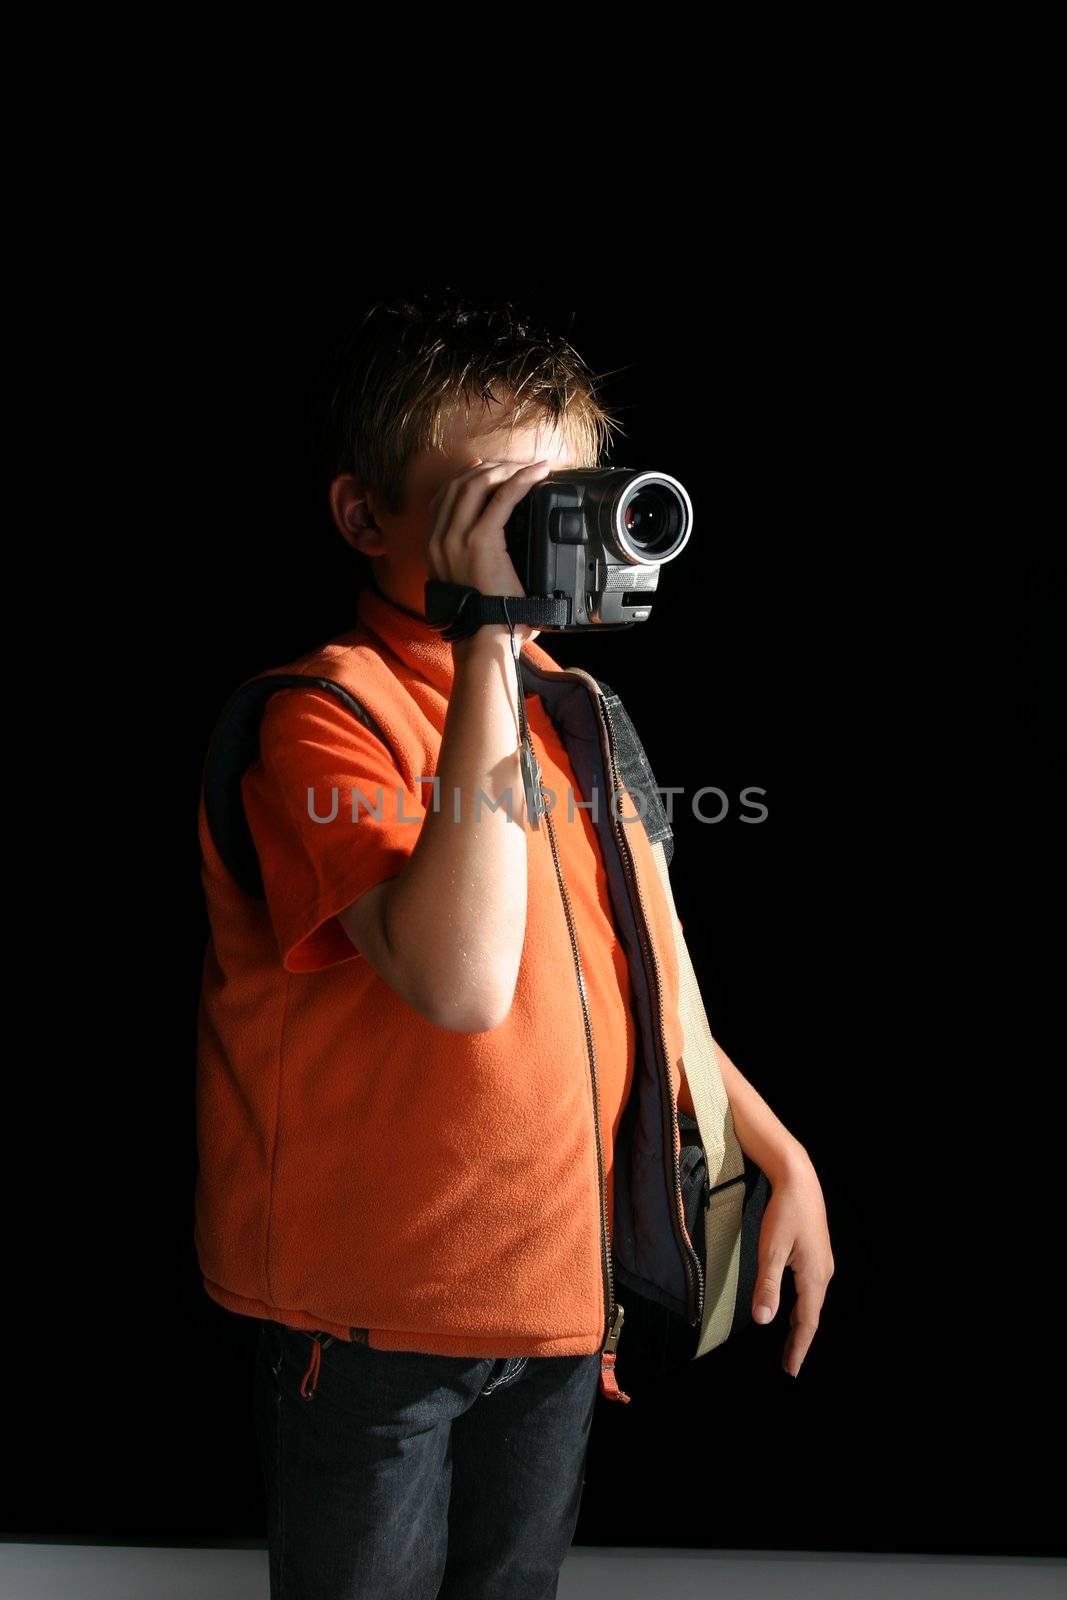 A child standing in a room or studio using a handheld digital video camera